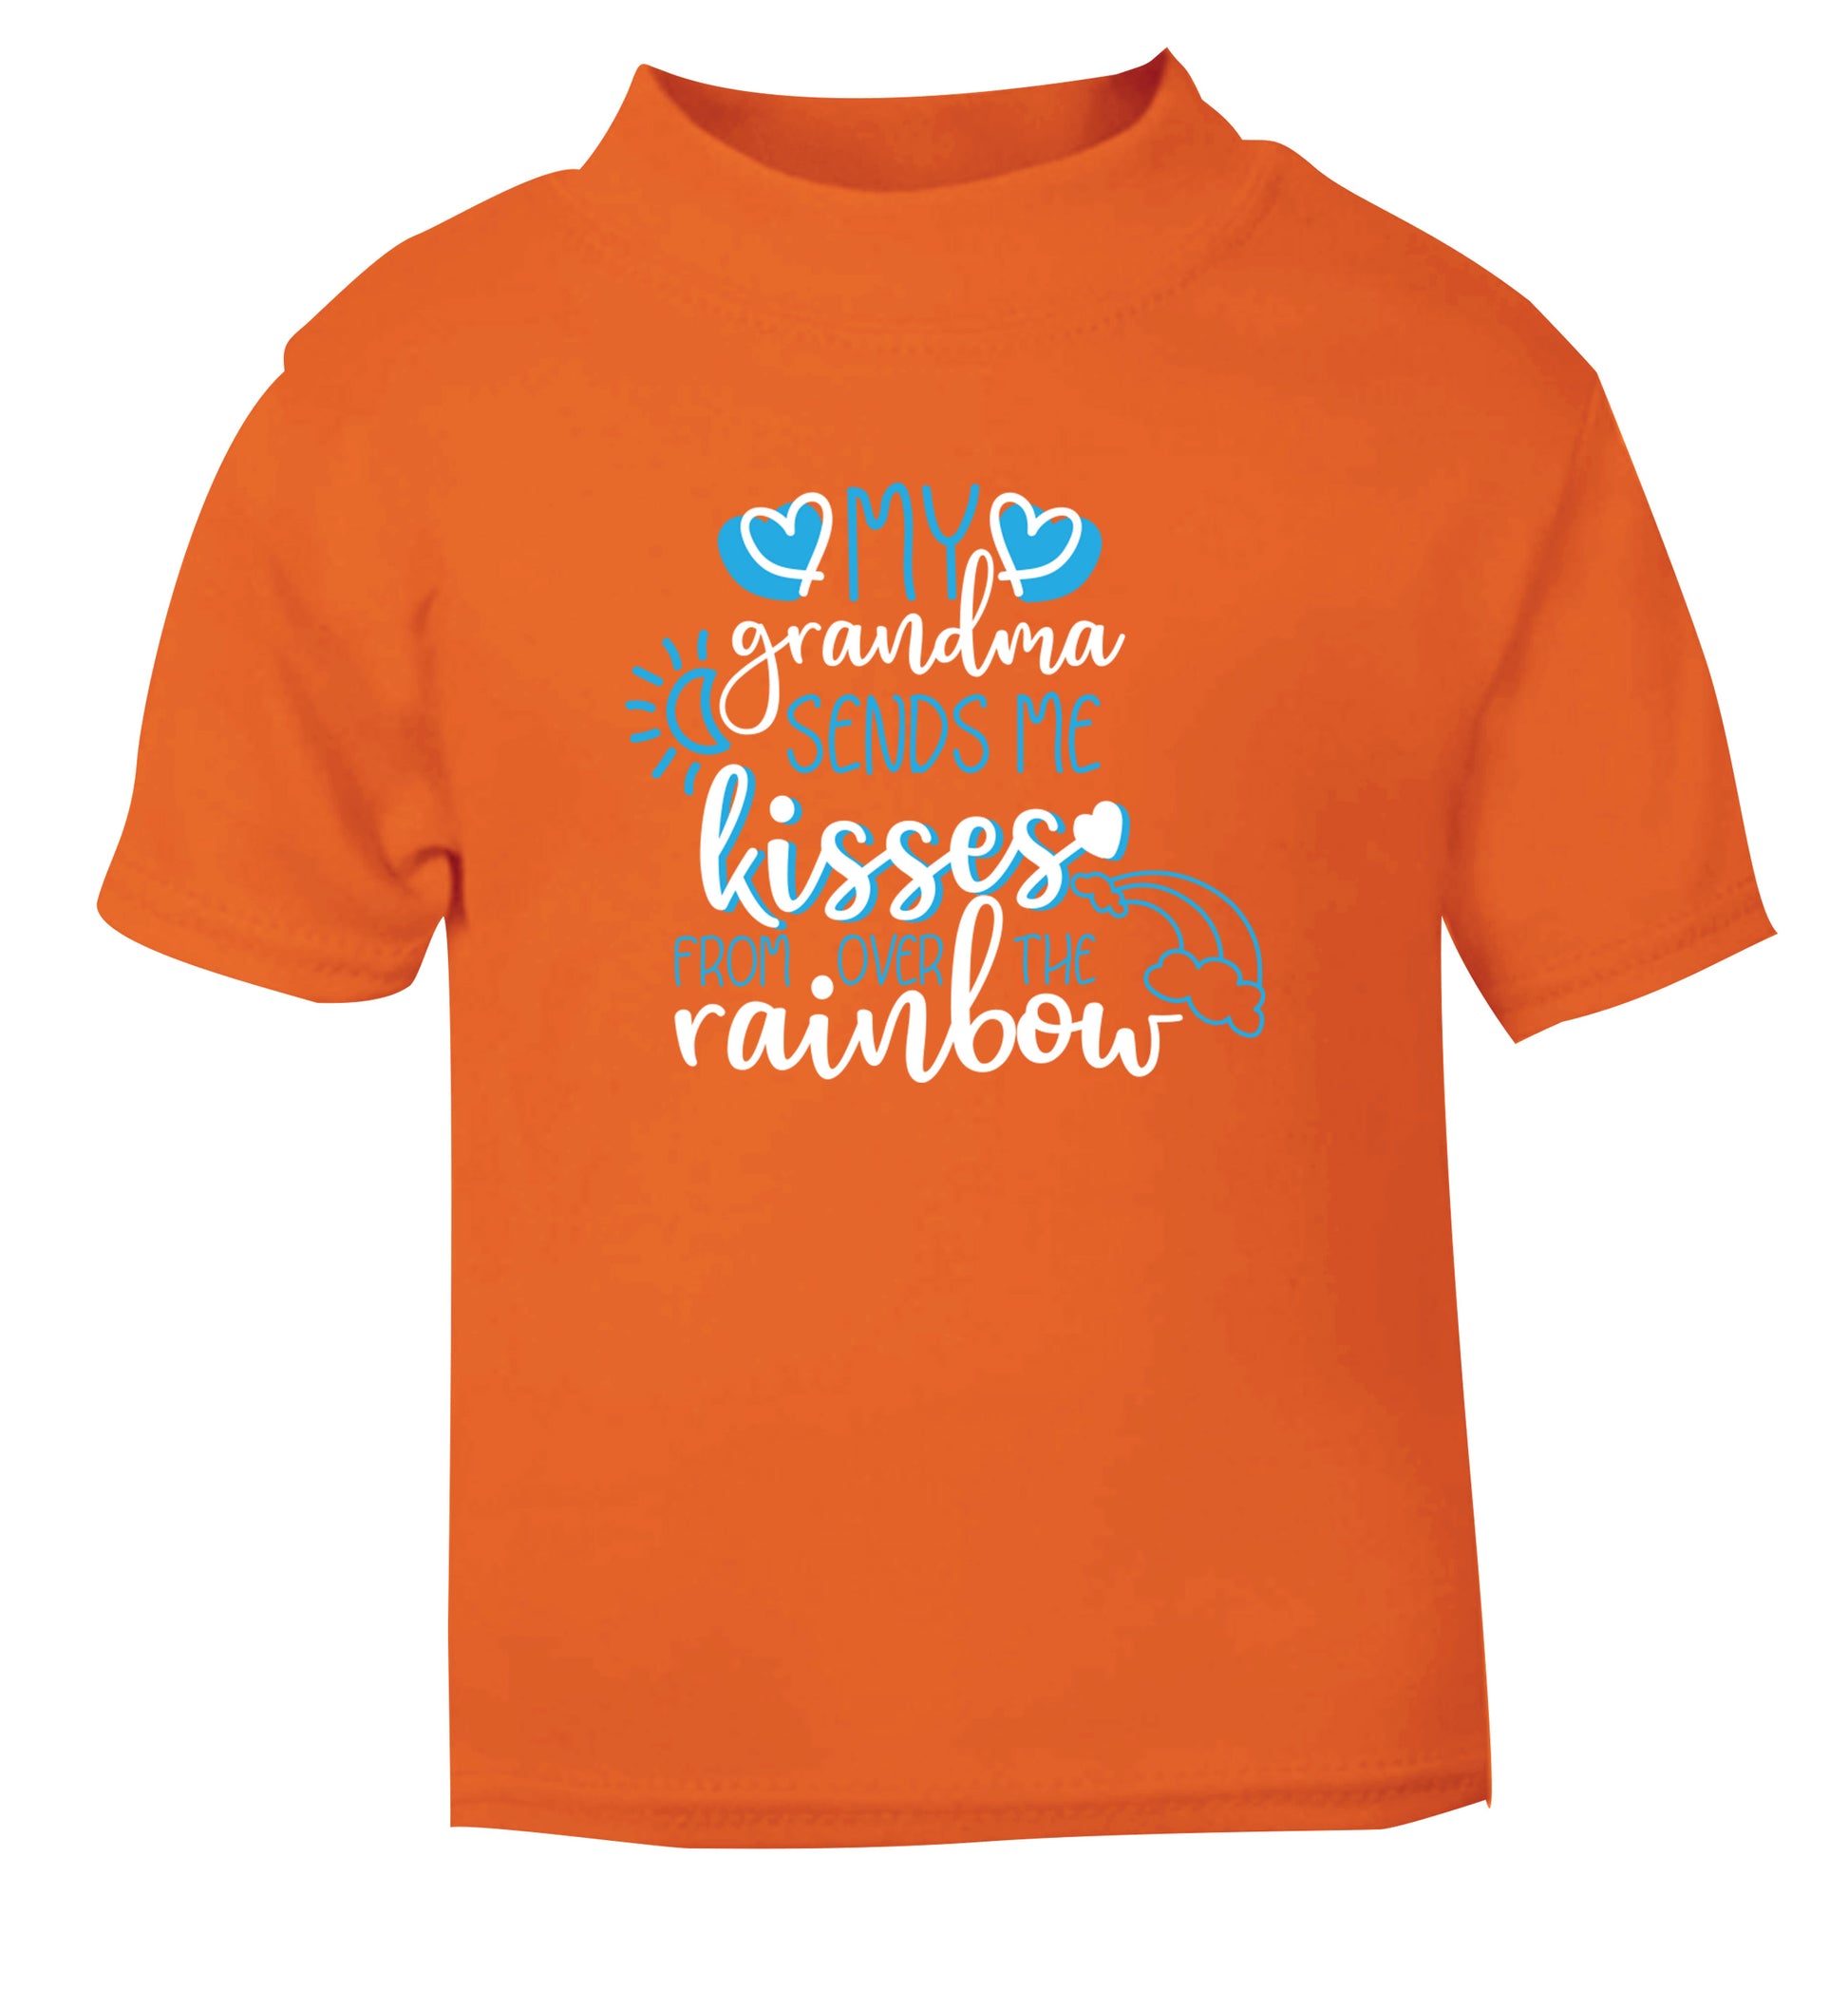 My grandma sends me kisses from over the rainbow orange Baby Toddler Tshirt 2 Years